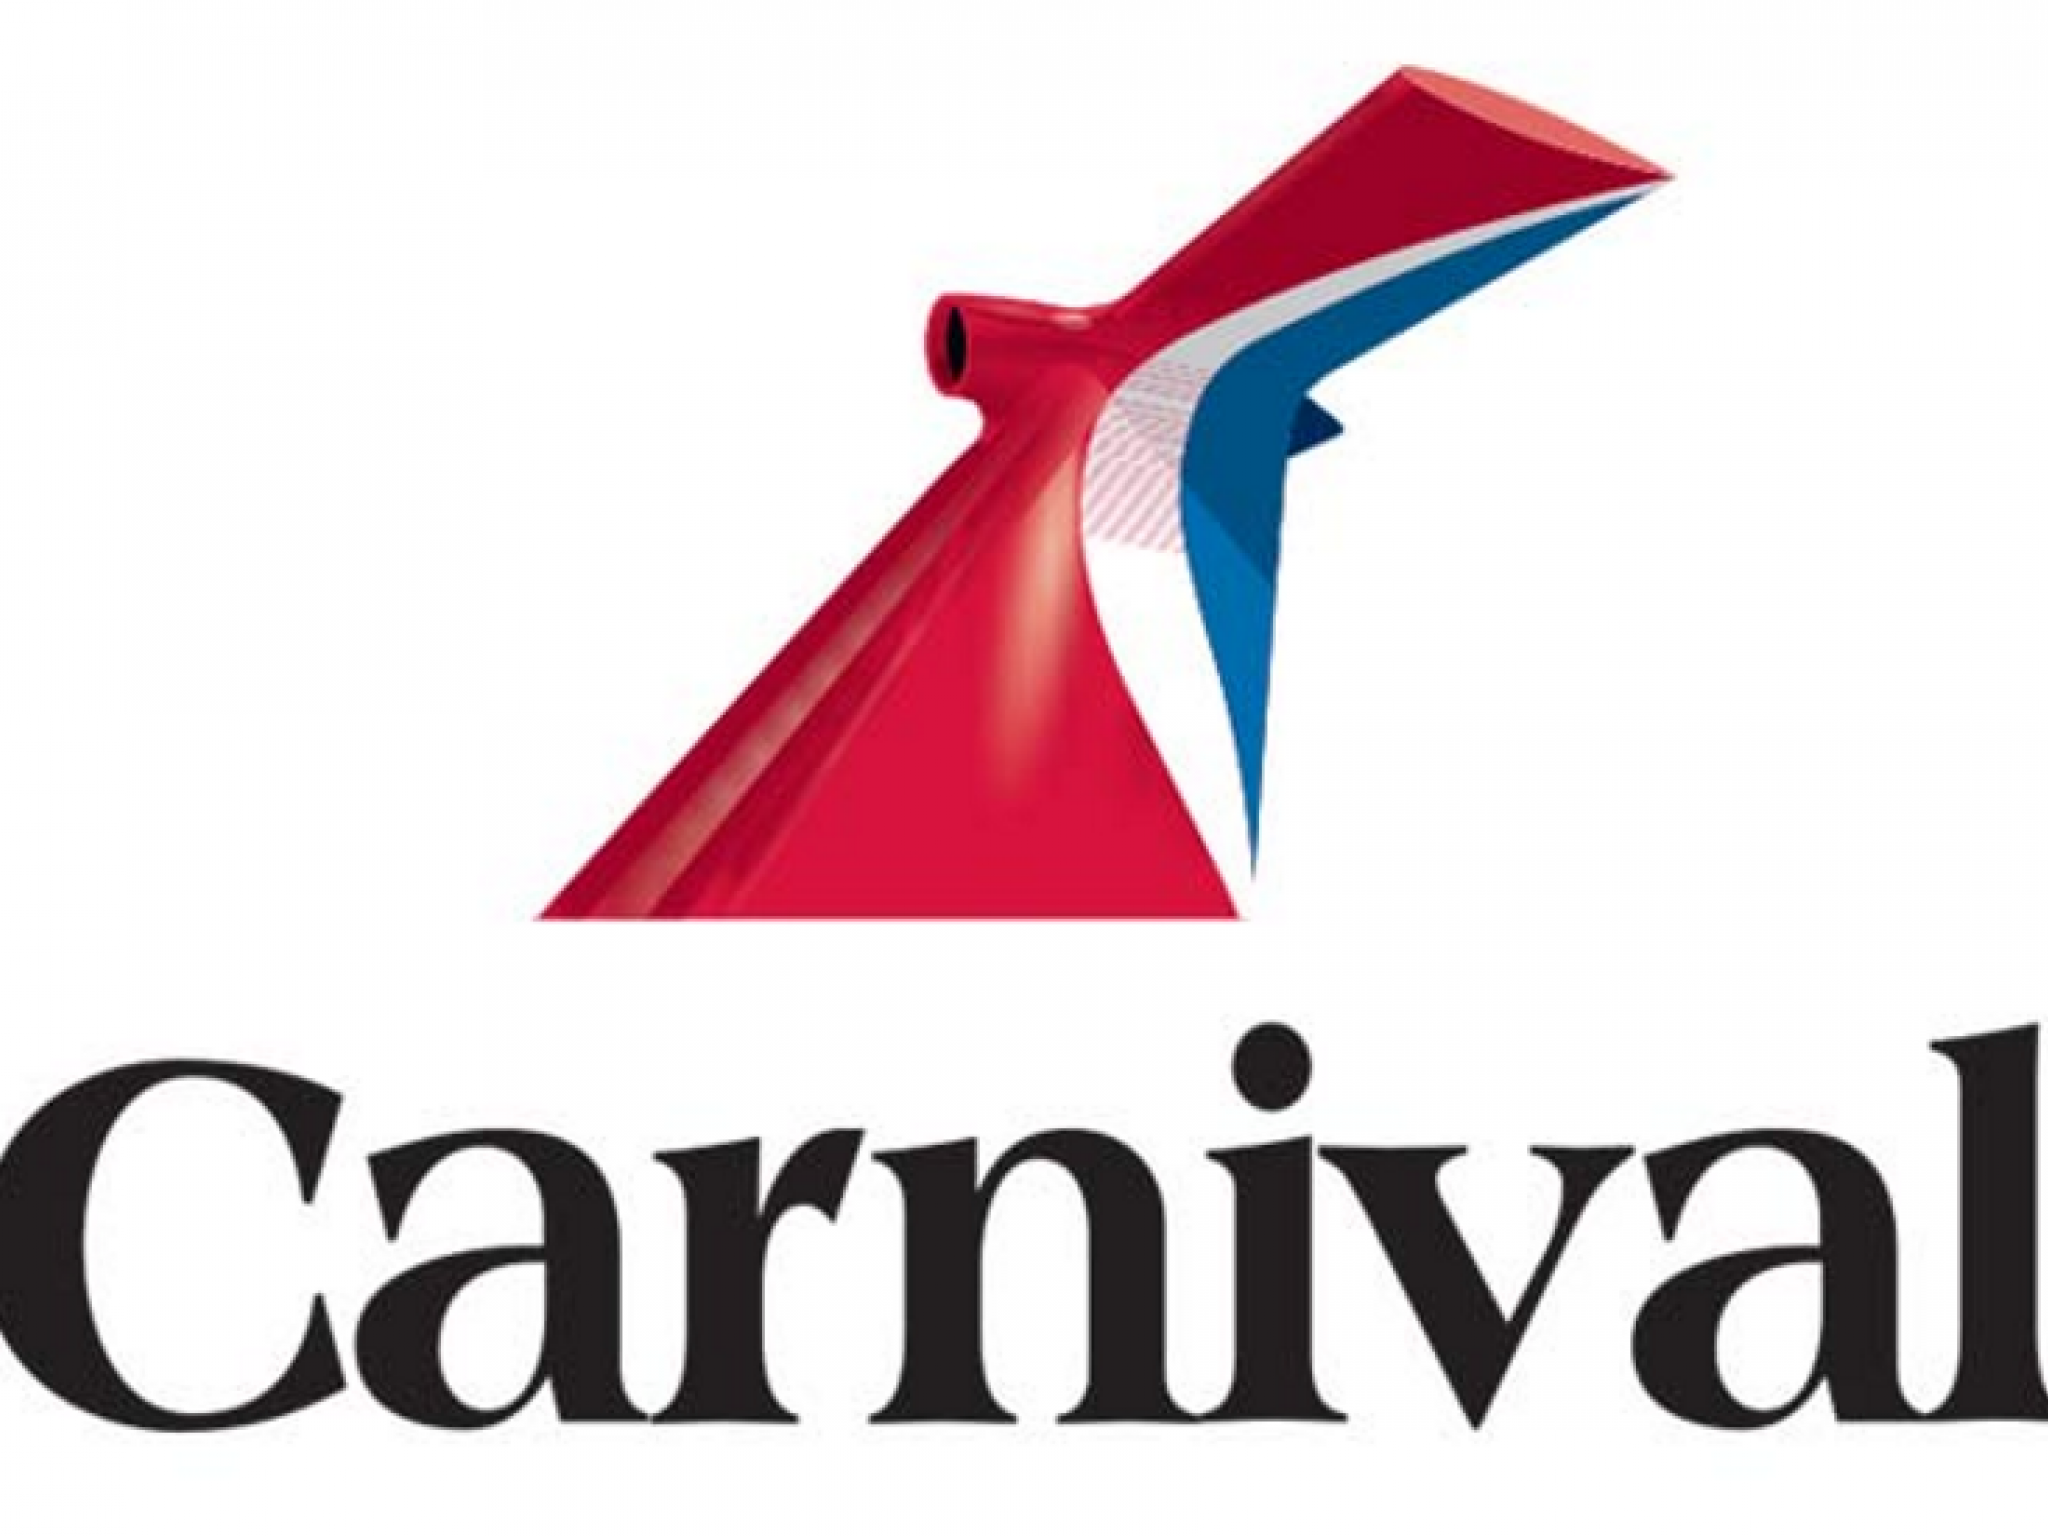  why-carnival-shares-are-trading-lower-by-19-here-are-49-stocks-moving-in-fridays-mid-day-session 